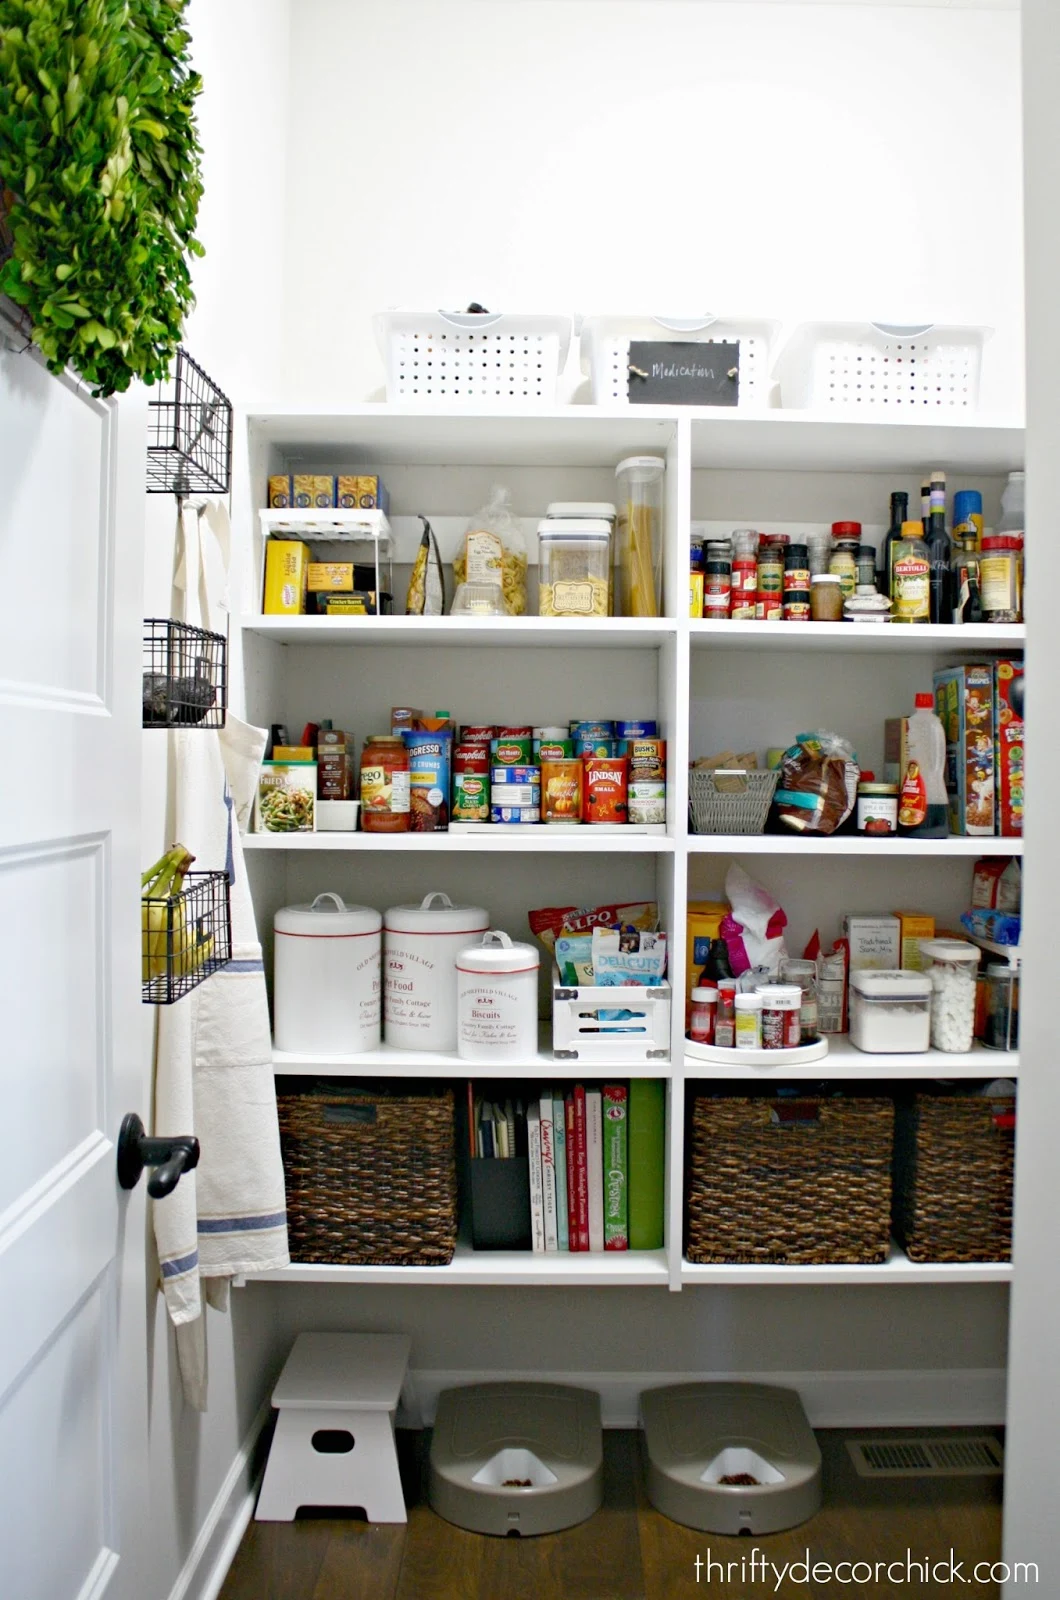 Organized pantry with baskets